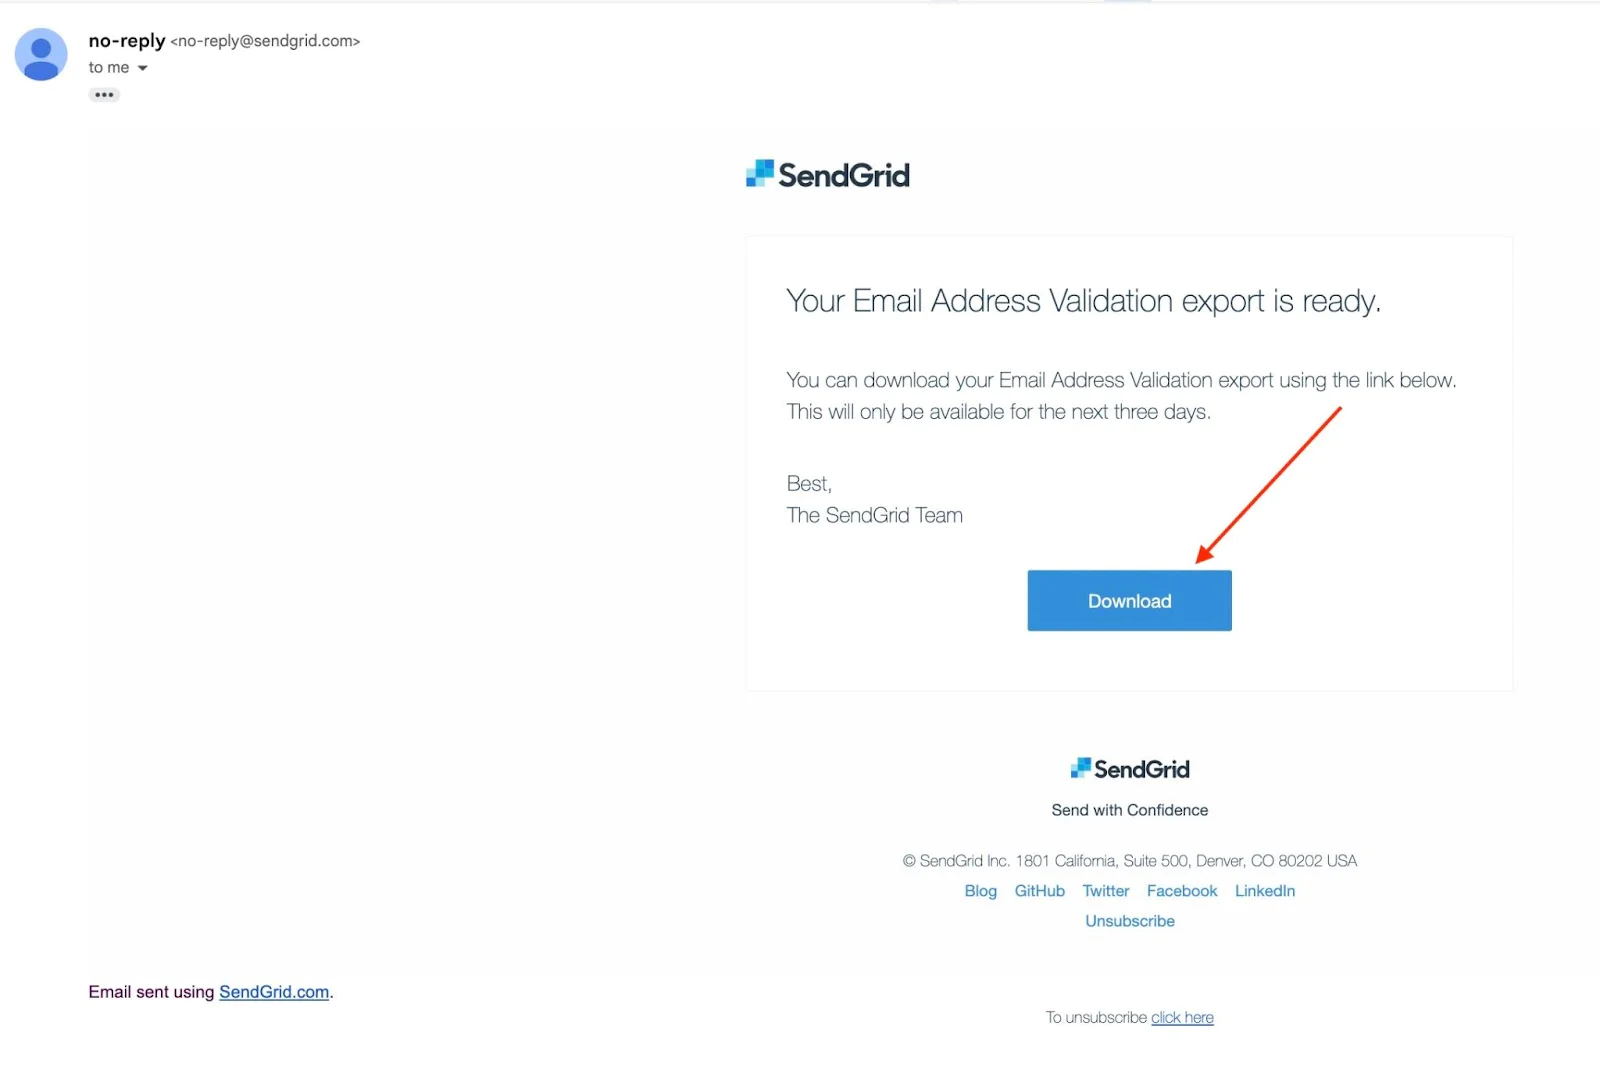 Snapshot of the email from SendGrid when the email validation export is ready